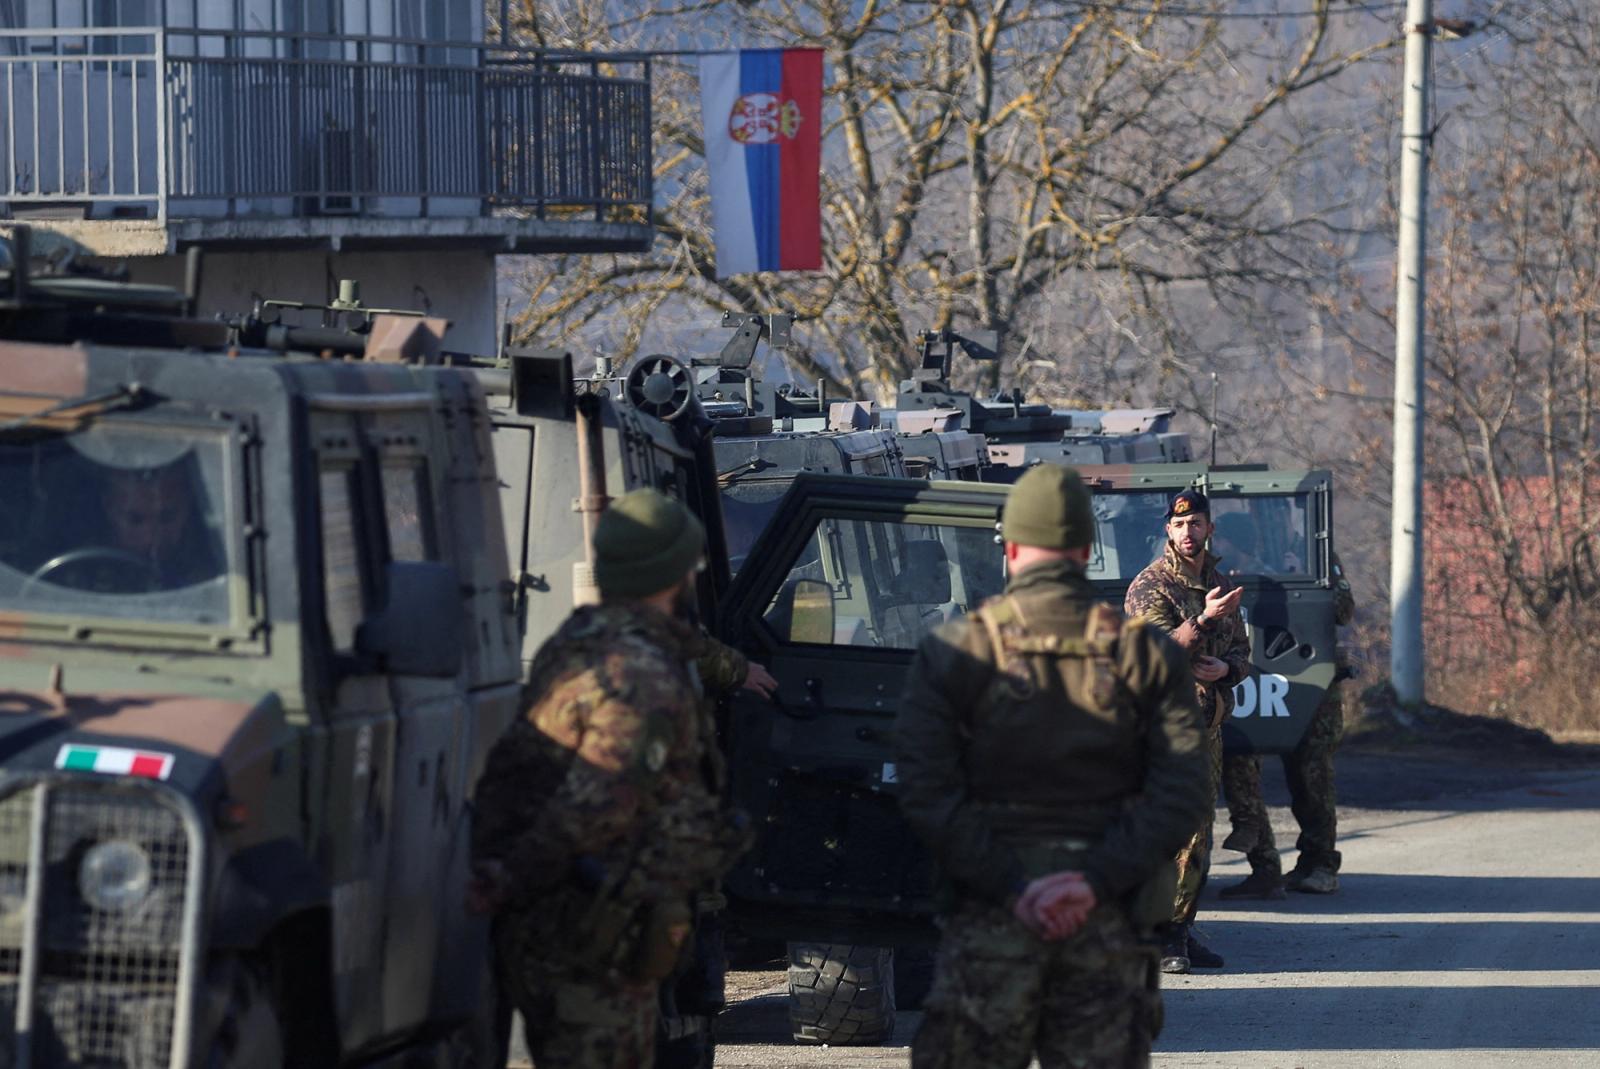 Members of the Italian Armed Forces, part of the NATO peacekeepers mission in Kosovo, stand guard, near a roadblock in Rudare, near the northern part of the ethnically-divided town of Mitrovica, Kosovo, December 27, 2022.